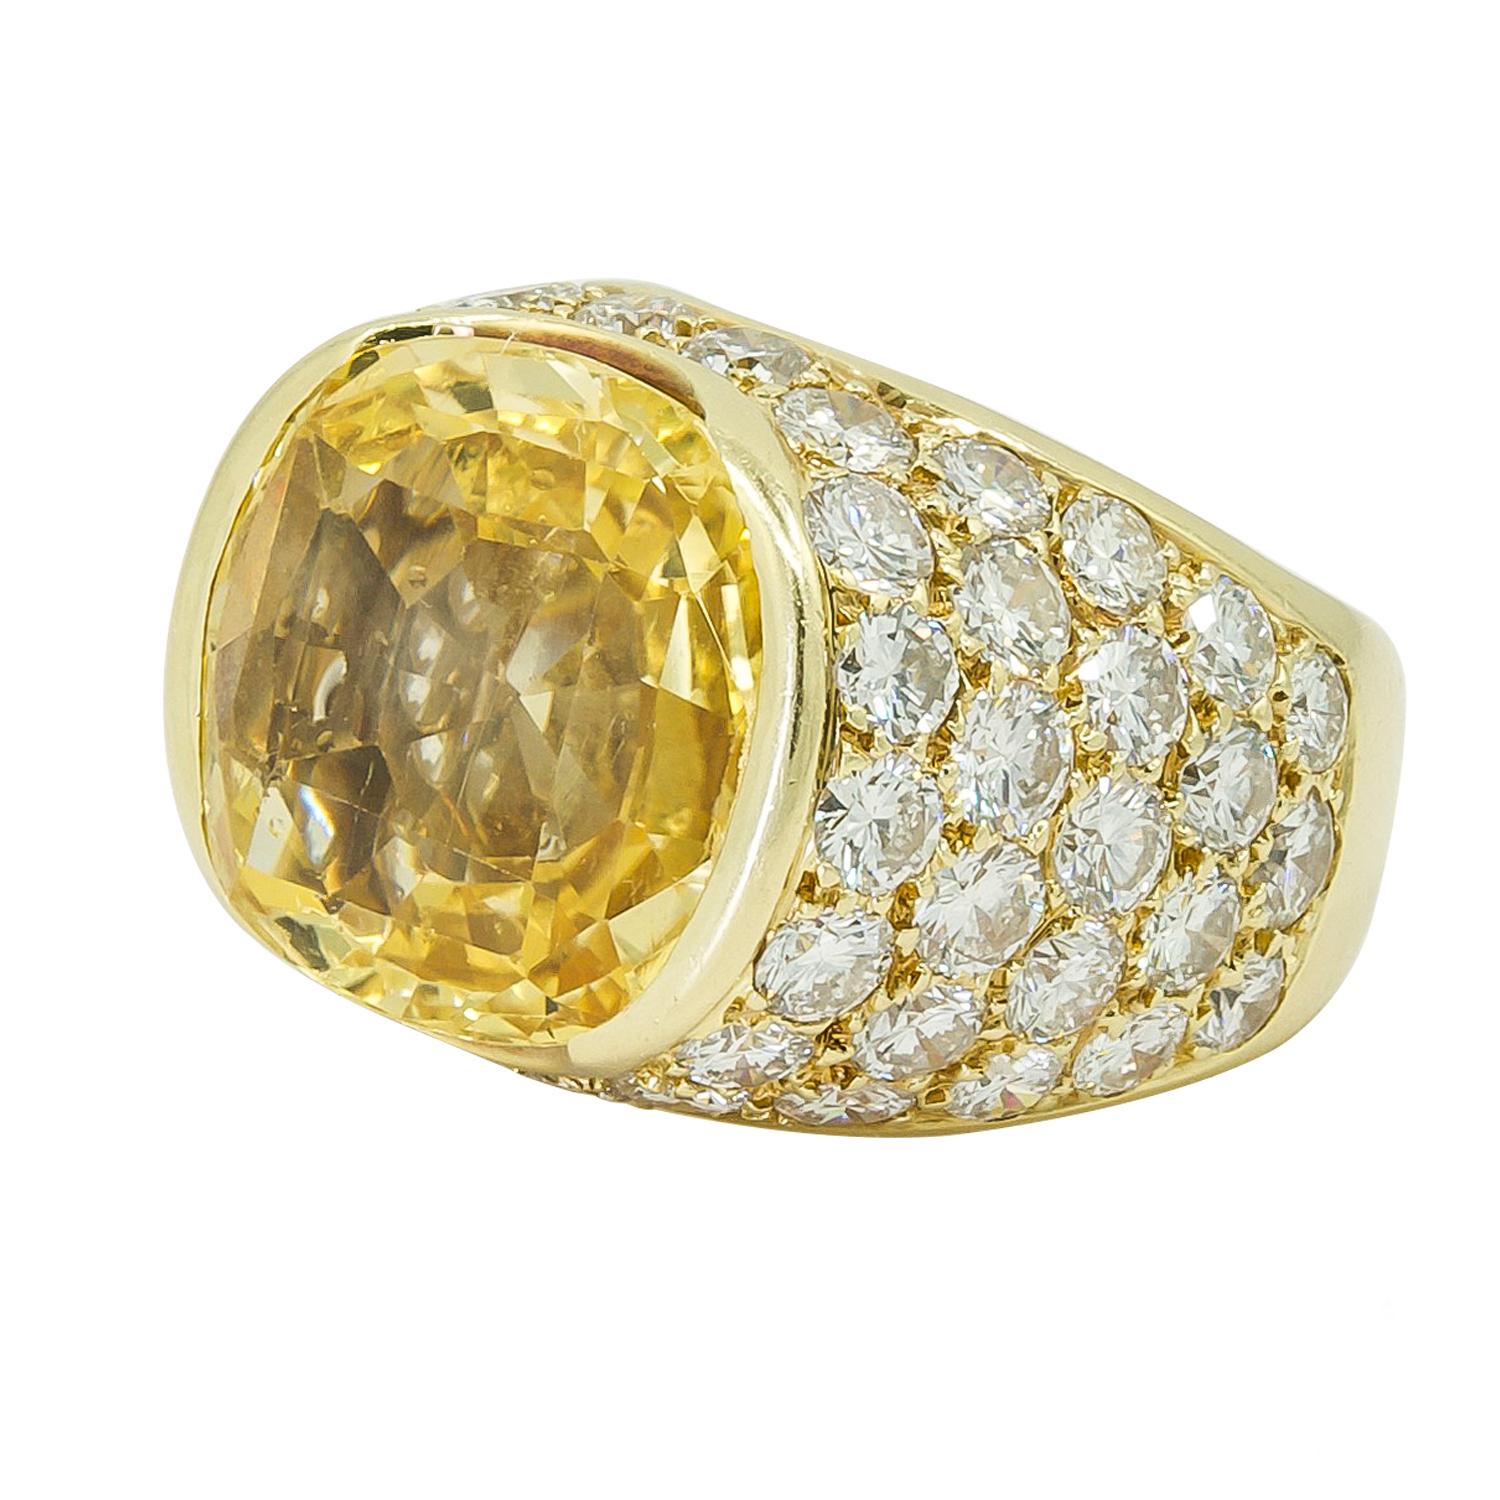 VAN CLEEF & ARPELS Diamond, Yellow Sapphire Ring
An 18k yellow gold ring, set with diamonds and Ceylon no heat yellow sapphire, signed Van Cleef & Arpels, circa 1980s.
Yellow sapphire approx. 18 cts. This comes with AGL certificate
54 round diamonds